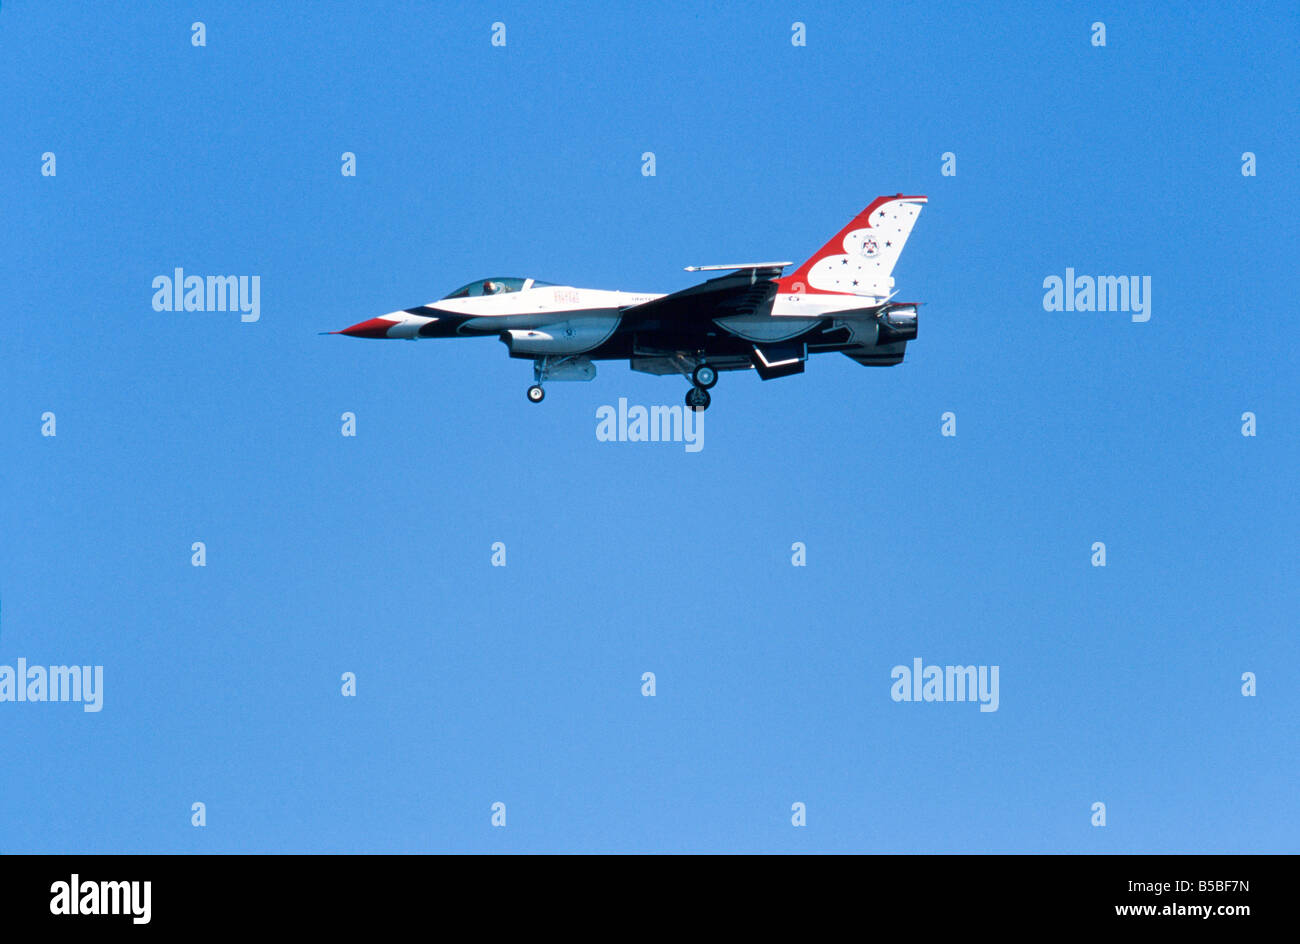 Military aircraft,US Air Force Thunderbirds flying team, in flight Stock Photo